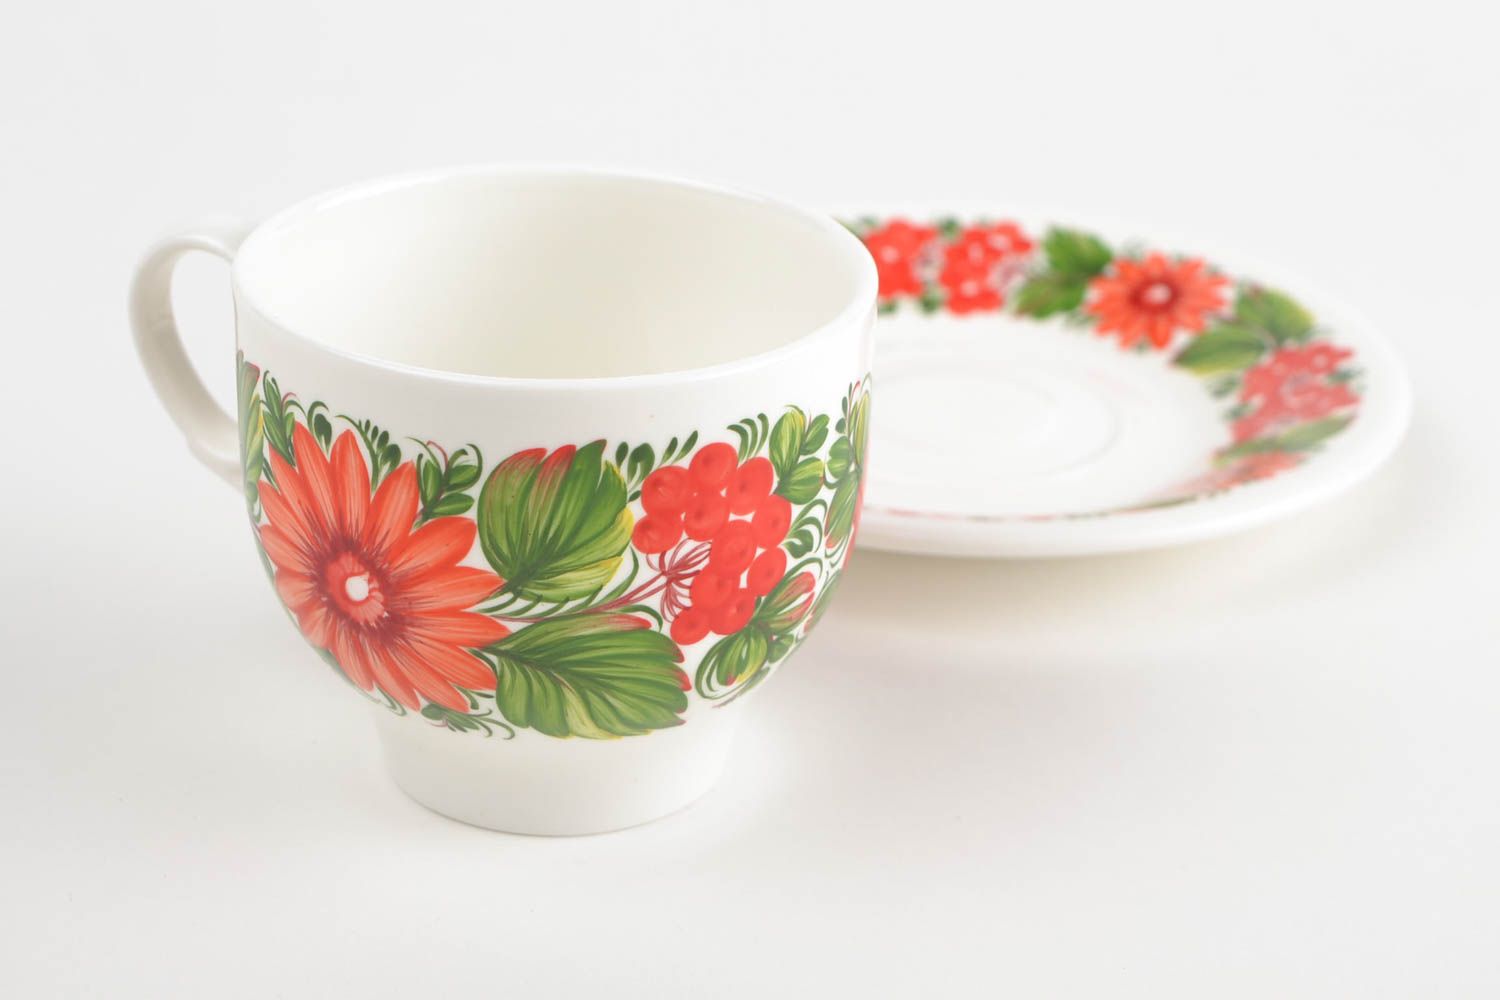 Porcelain 5 oz cup with flower pattern, handle, and saucer photo 3